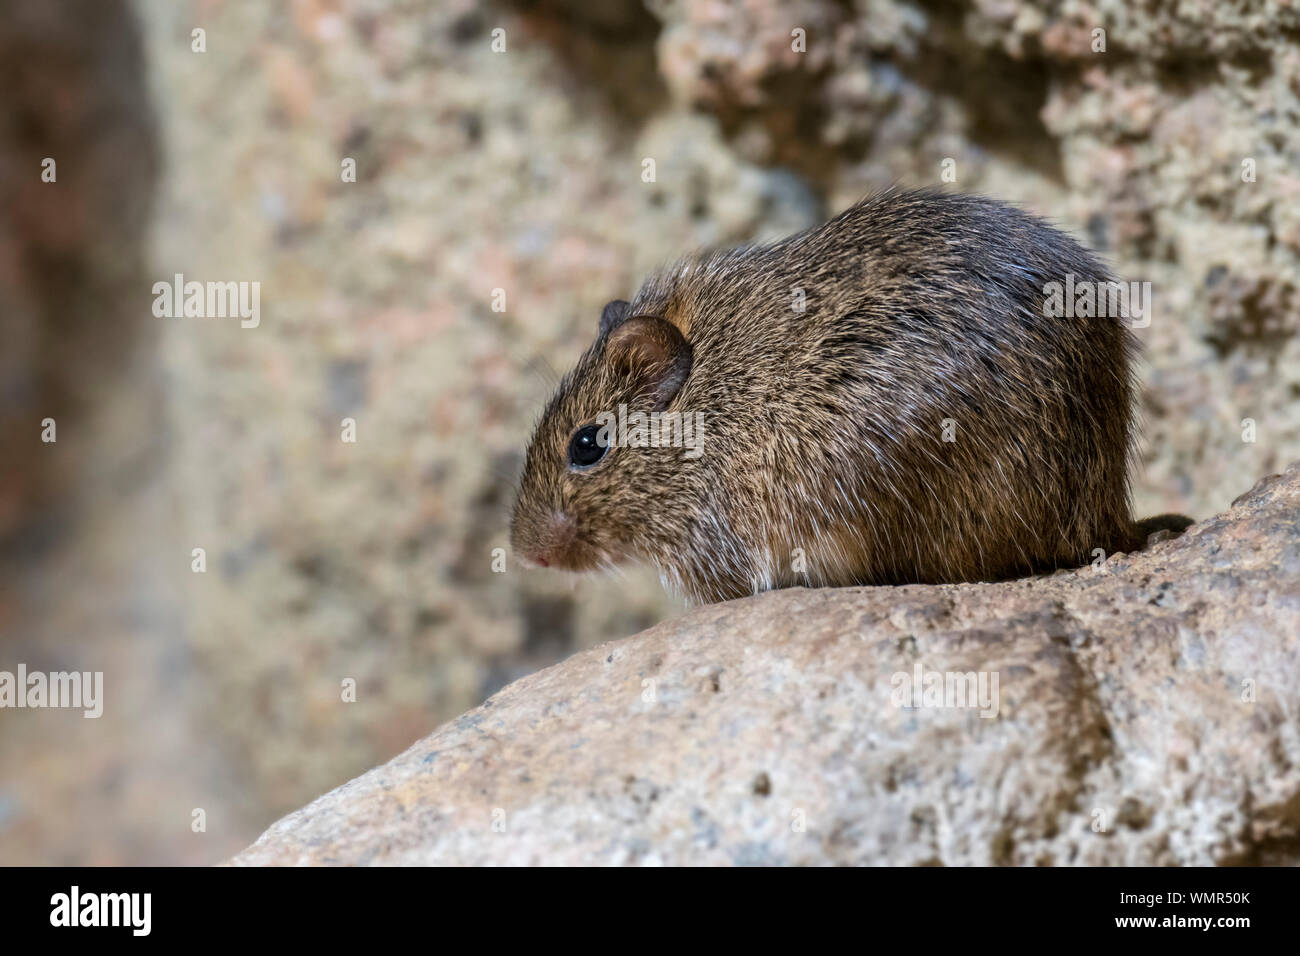 Hispid cotton rat (Sigmodon hispidus) rodent native to South America, Central America, and southern North America Stock Photo